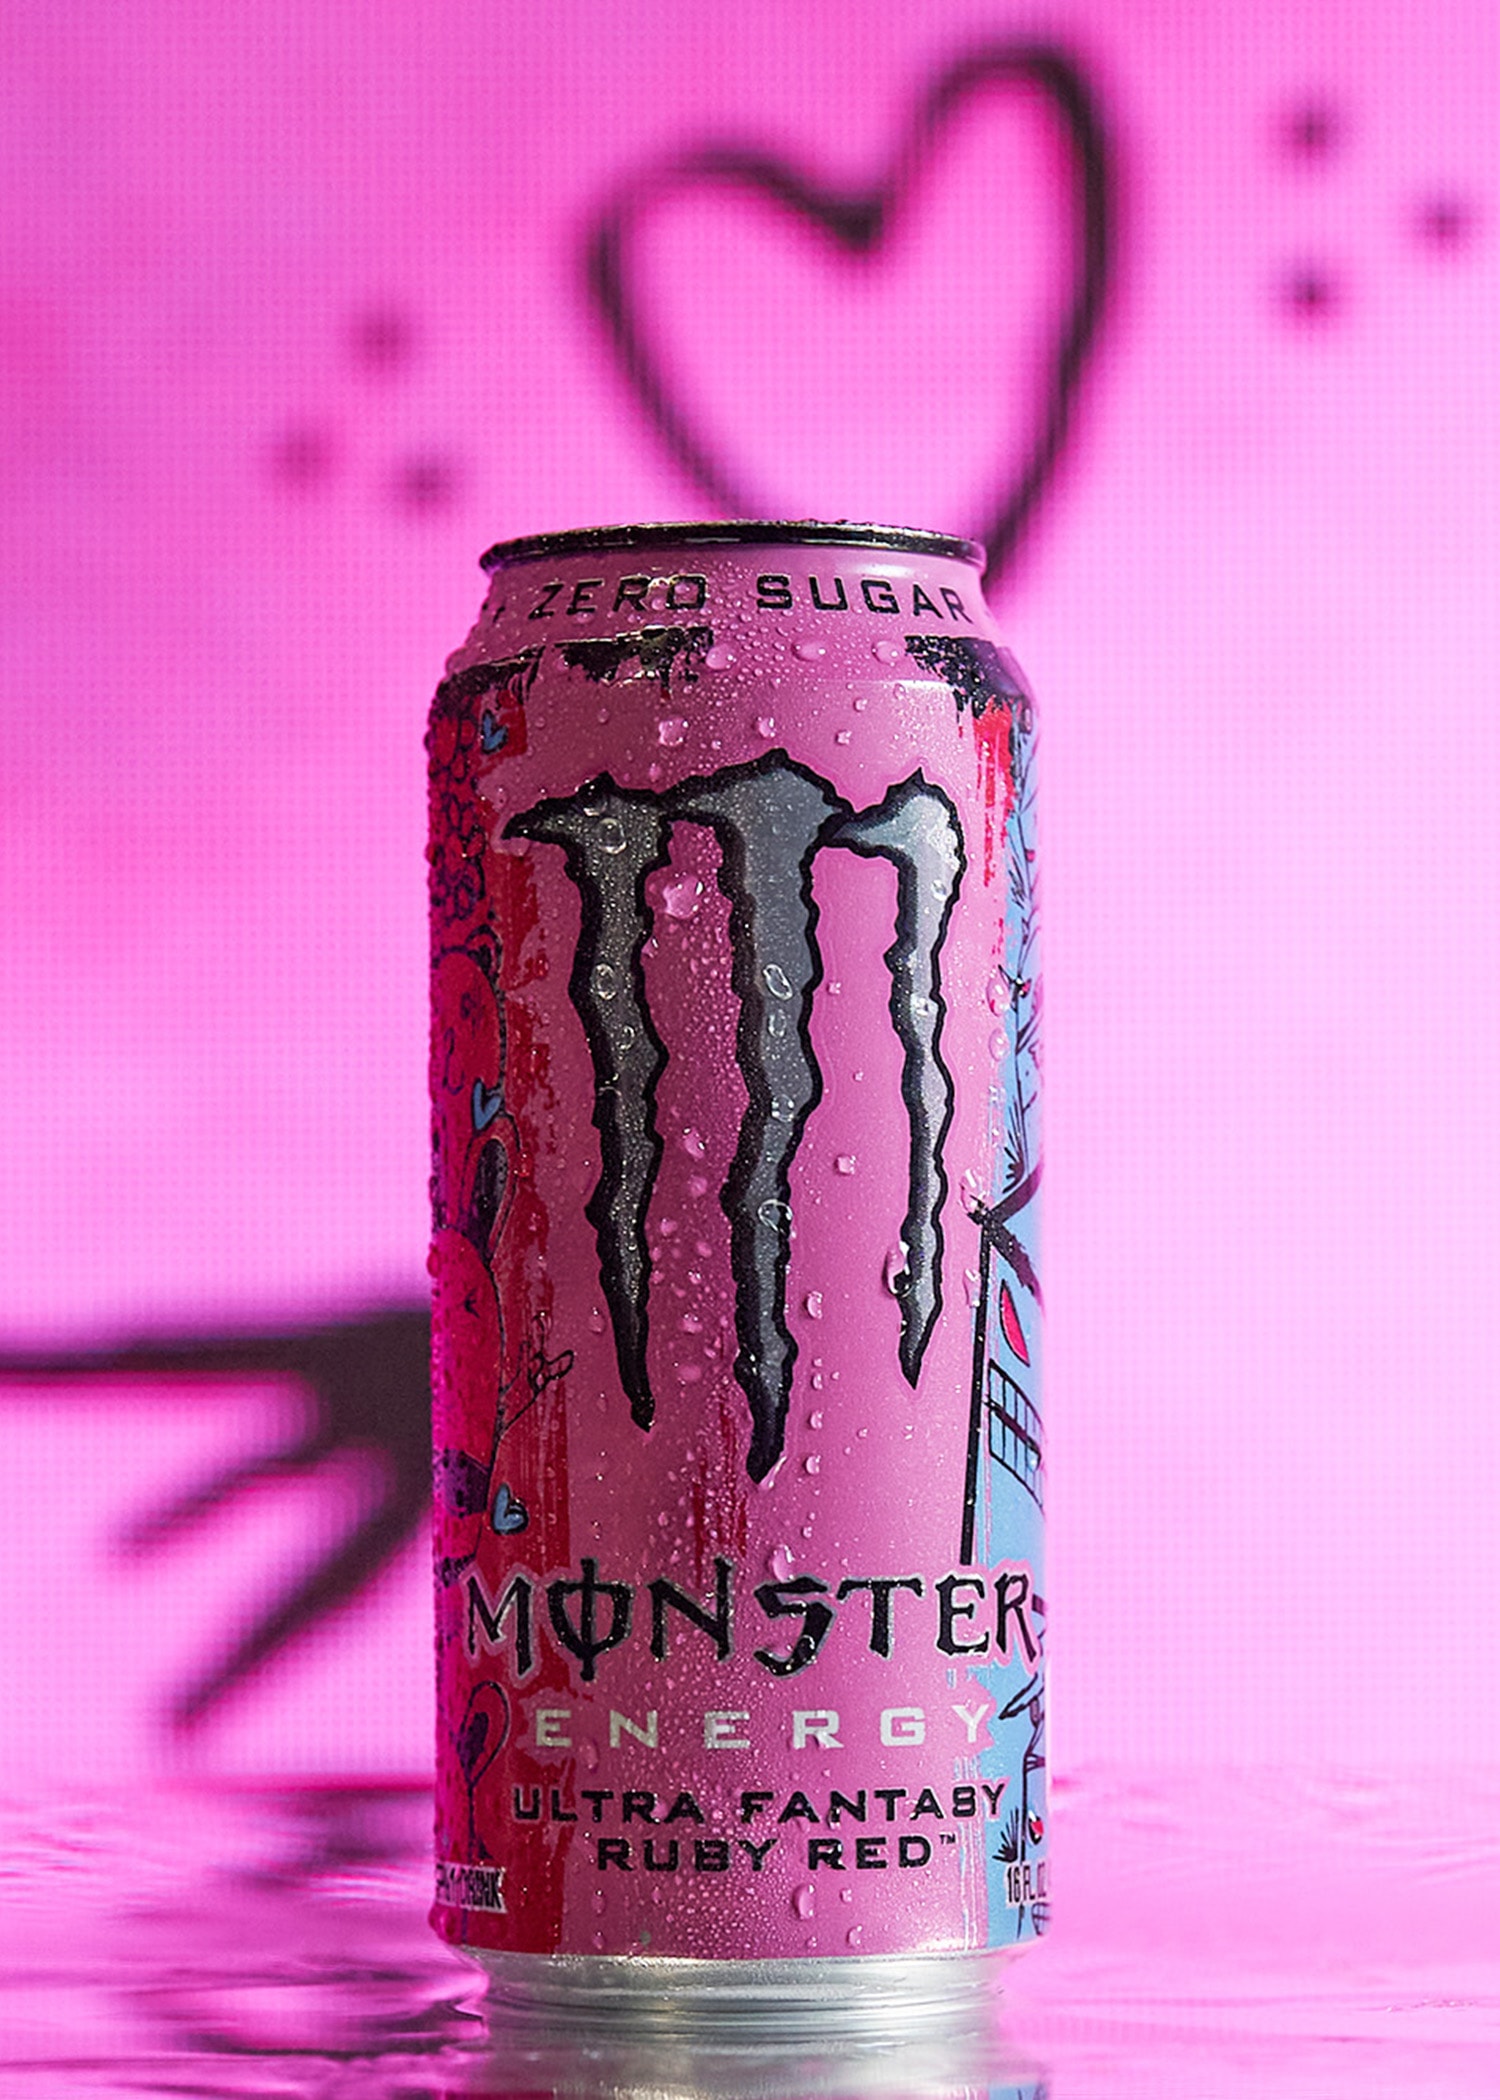 Monster Energy Ultra is Hosting an Immersive Fantasy Event with Interactive Art